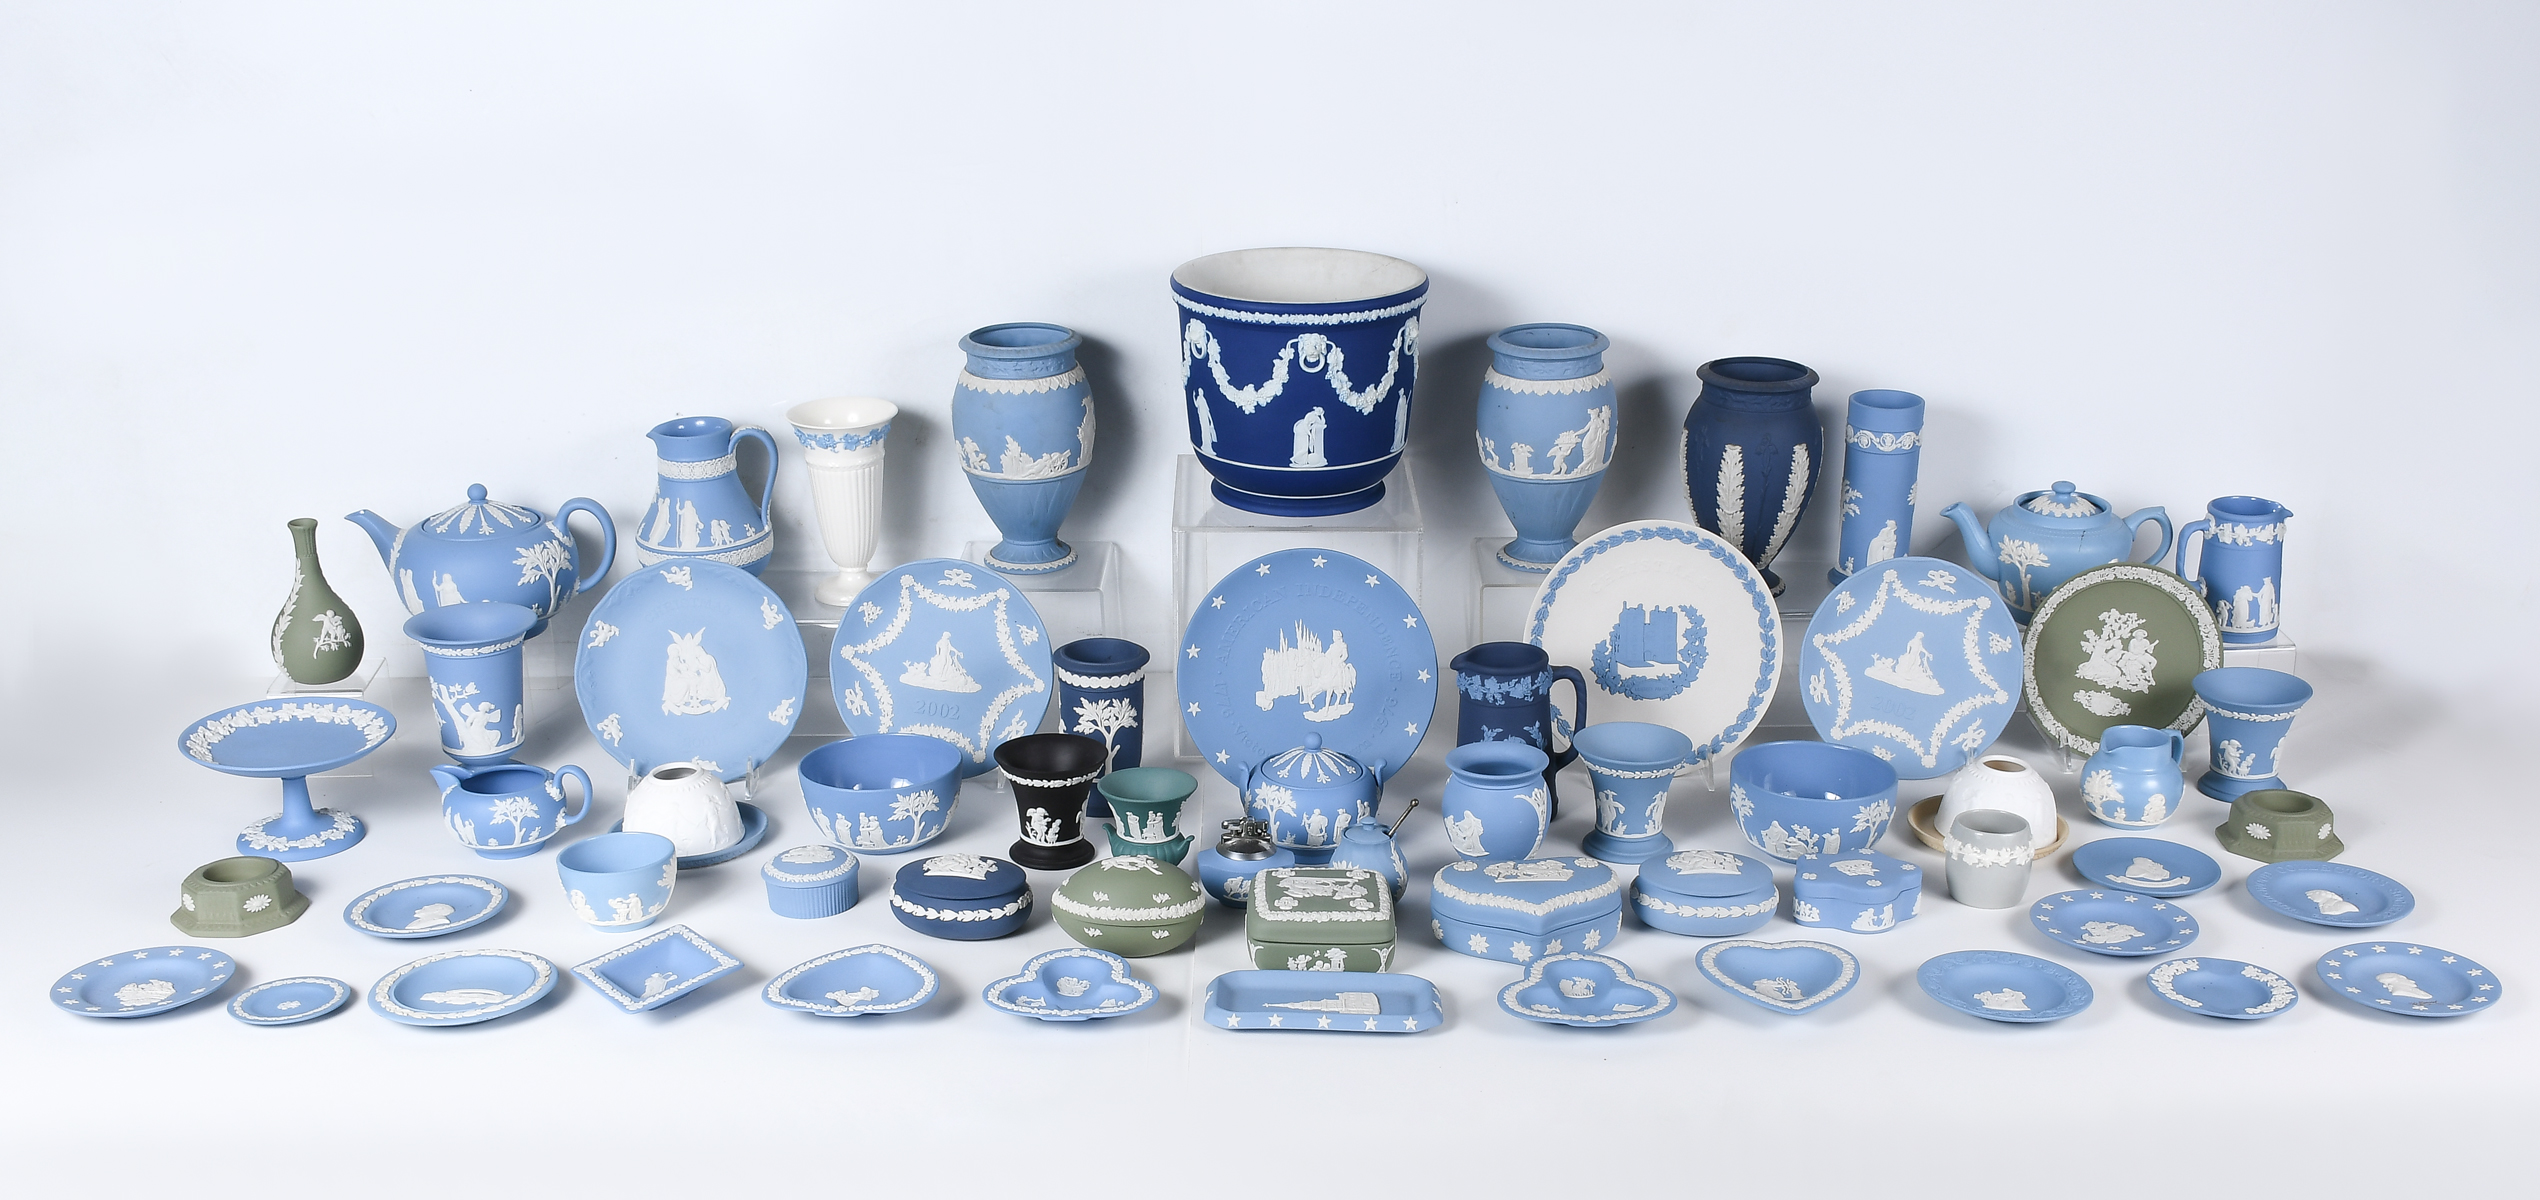 62 PC WEDGWOOD JASPERWARE COLLECTION  36a975